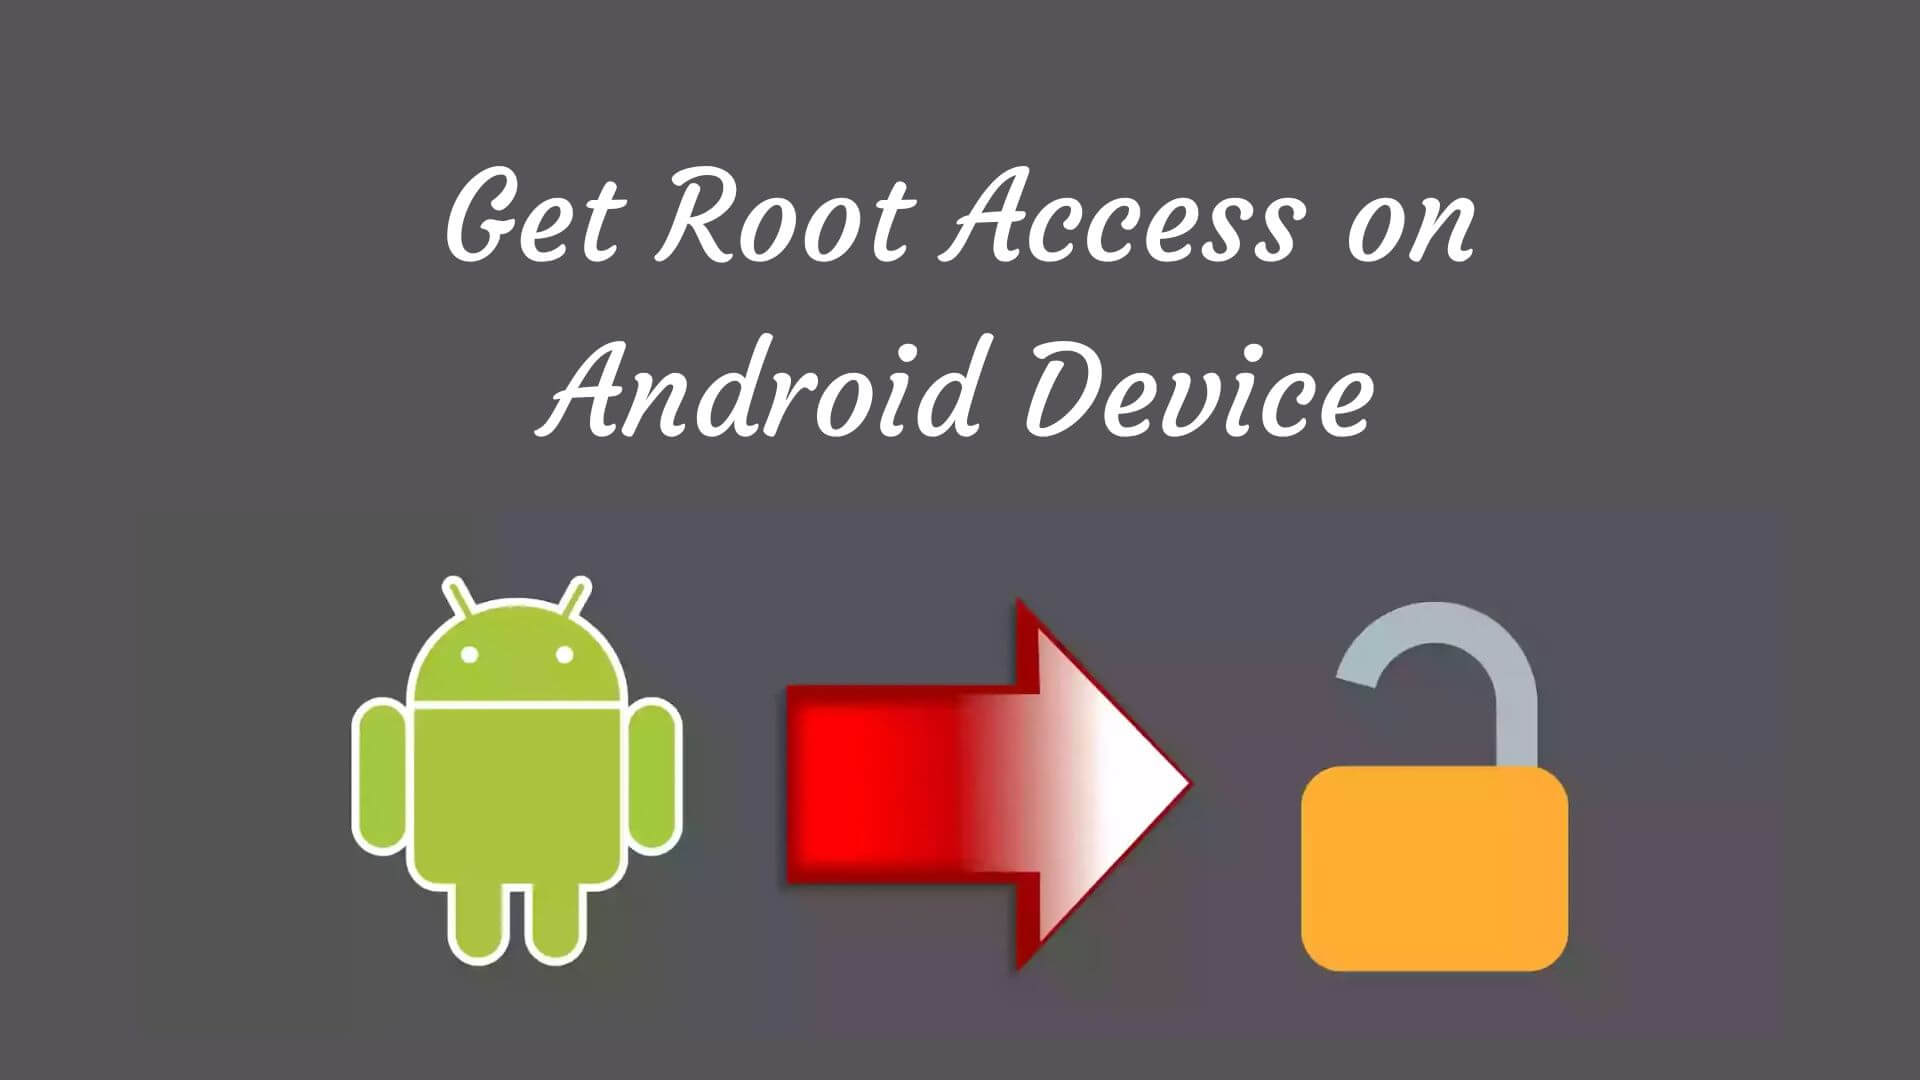 Get root access on your android